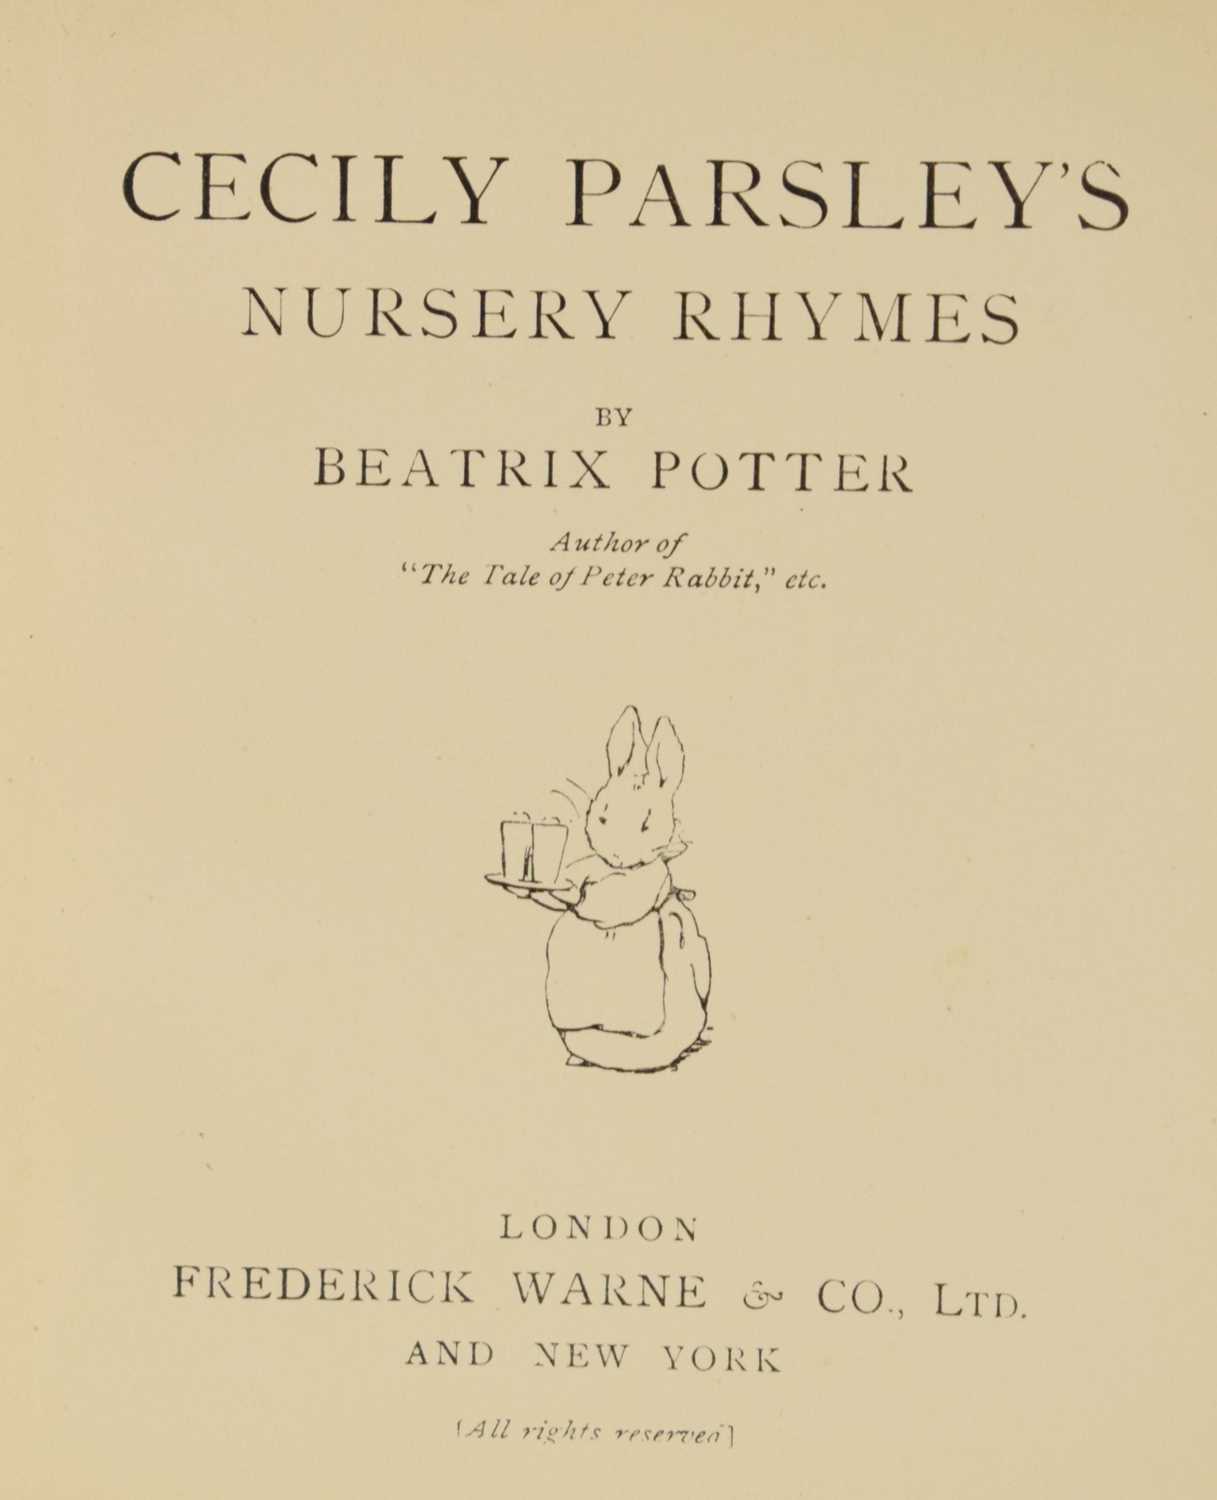 Potter, Beatrix - 'Cecily Parsley's Nursery Rhymes' - First edition - Image 10 of 37